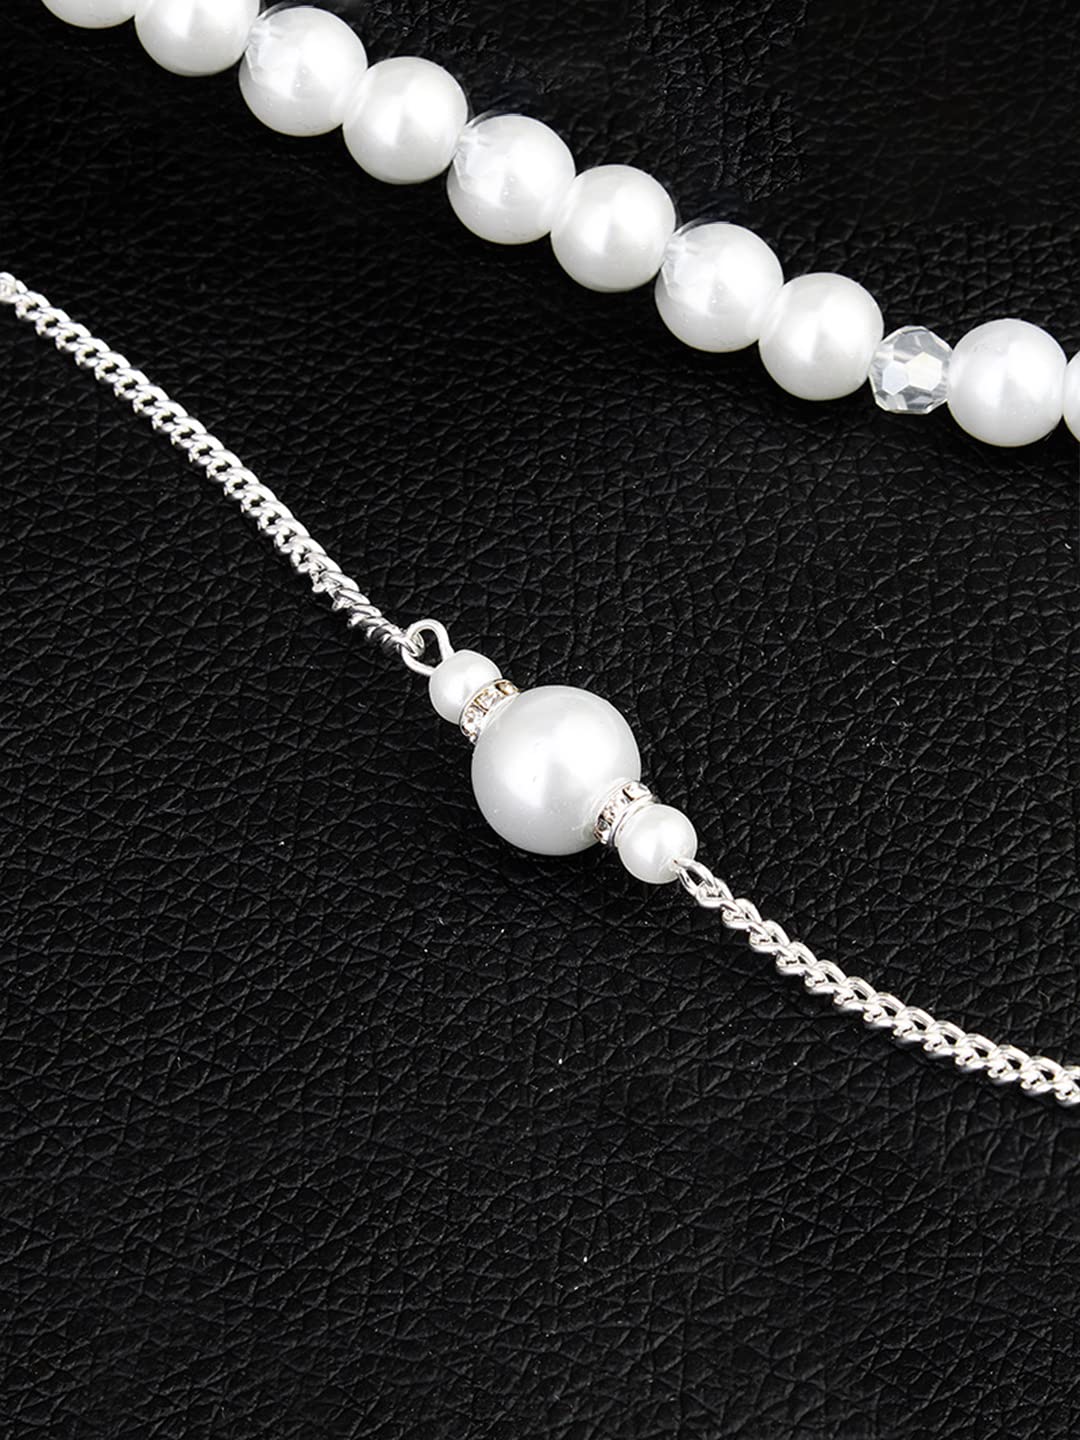 Teardrop Pearl Back Drop Lariat Bridal Necklace gold or silver chain